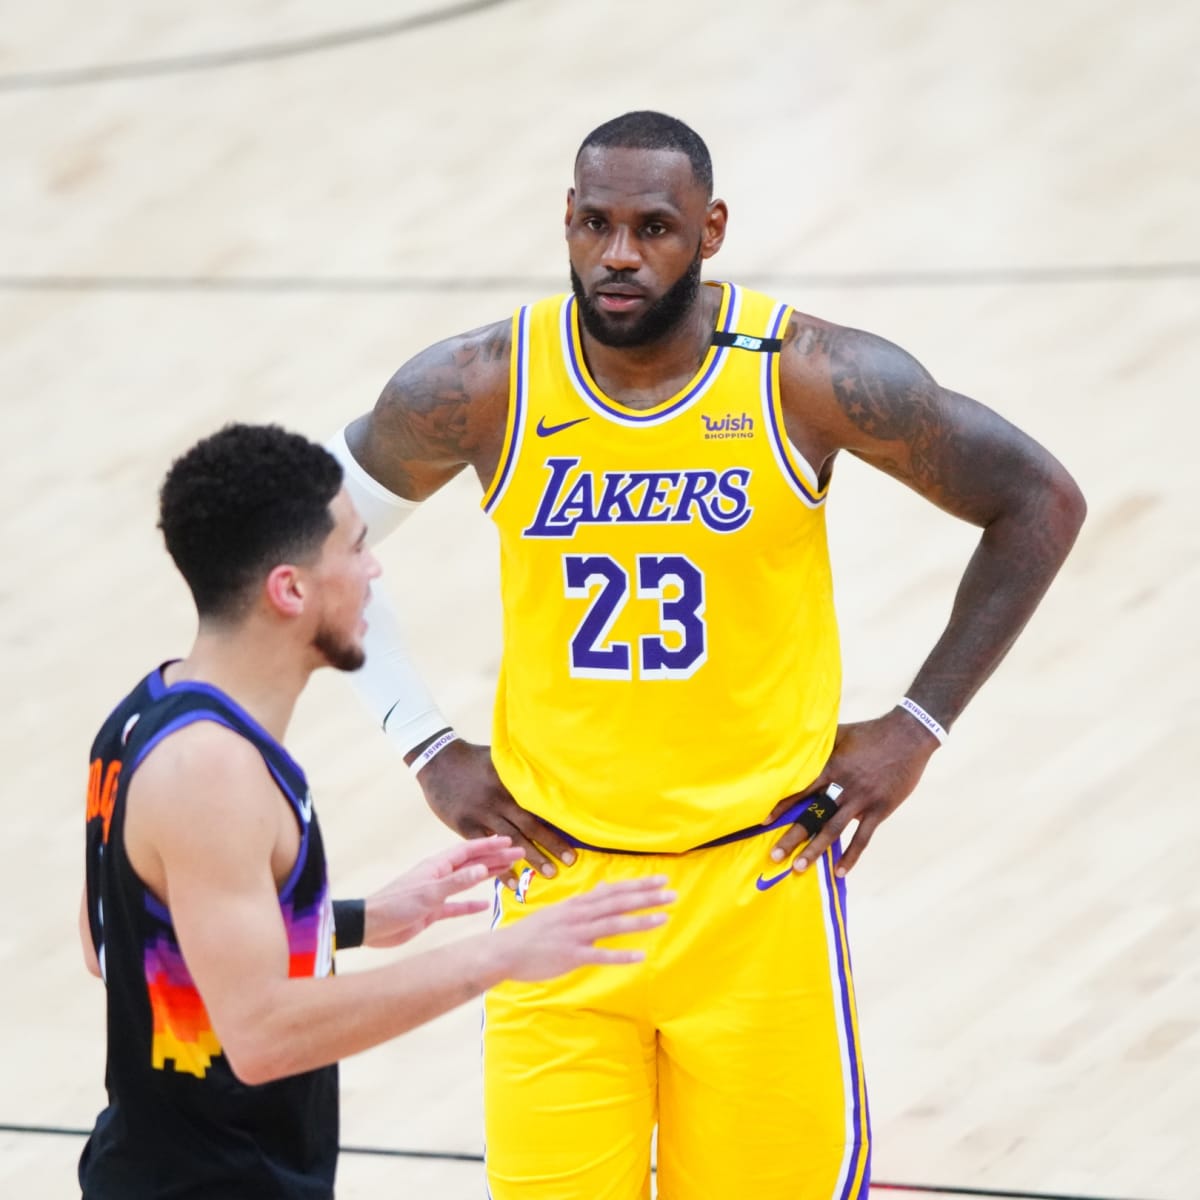 Devin Booker is biggest loser of LeBron James' Lakers jersey